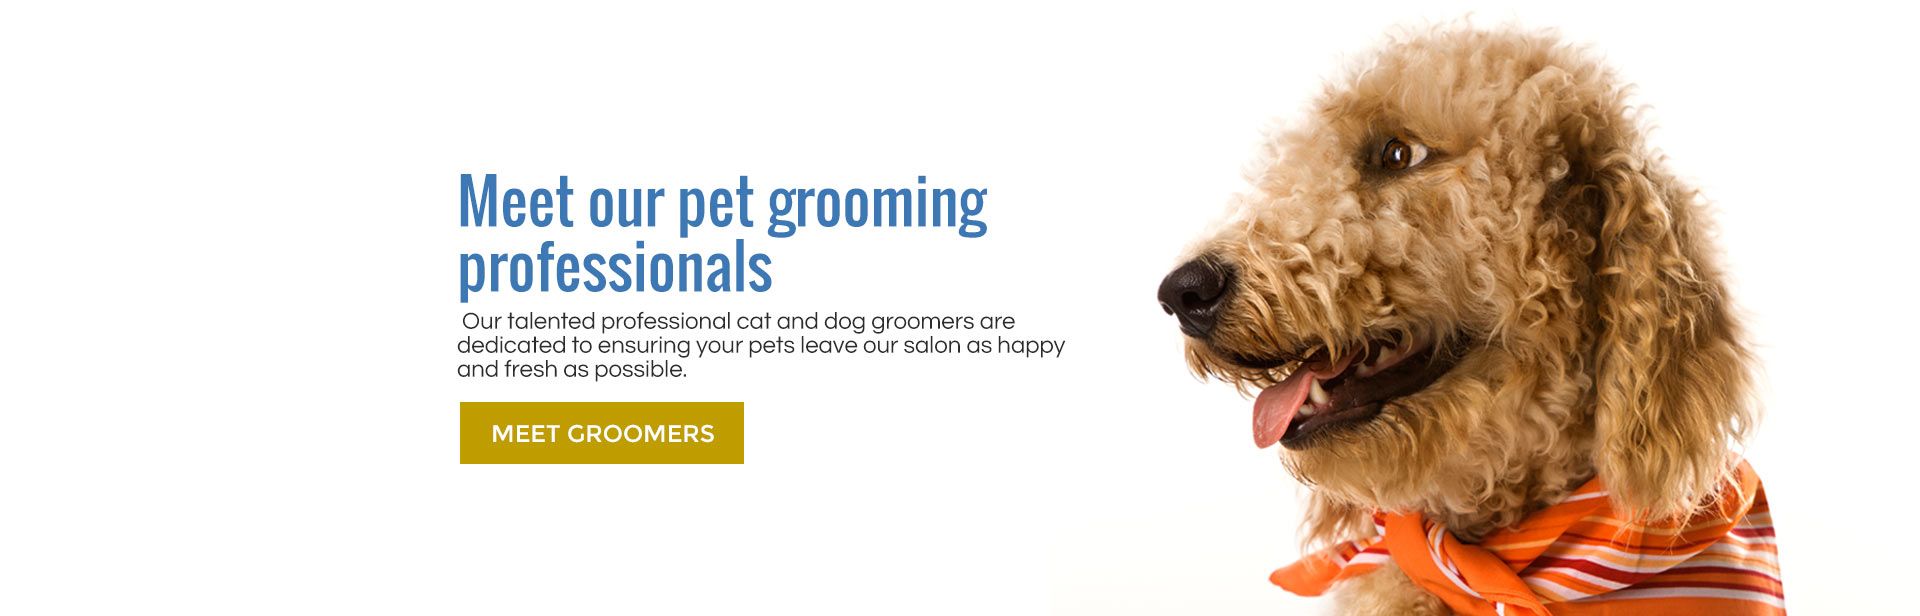 Meet our talented groomers